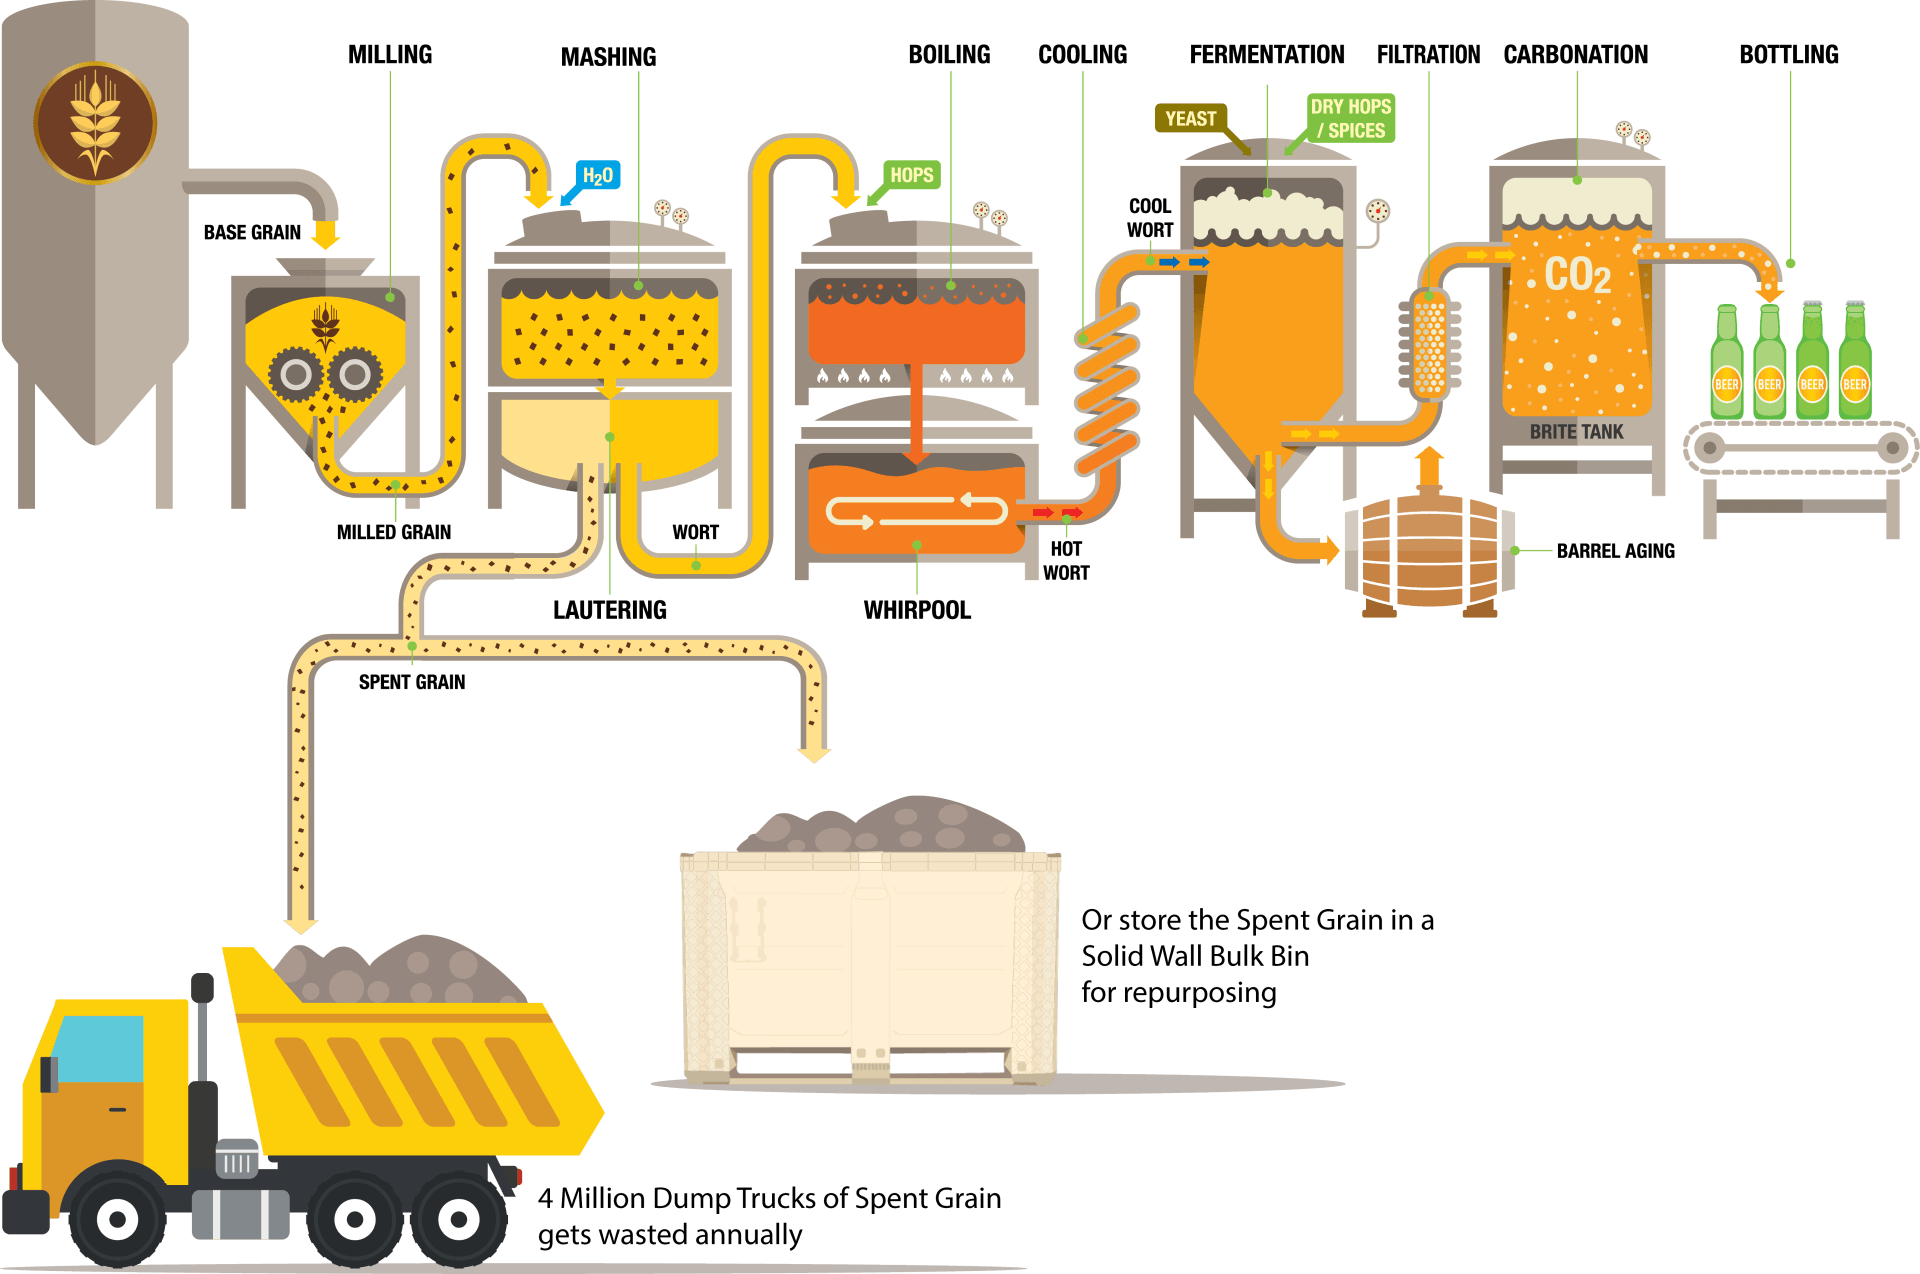 Brewing process for Beer